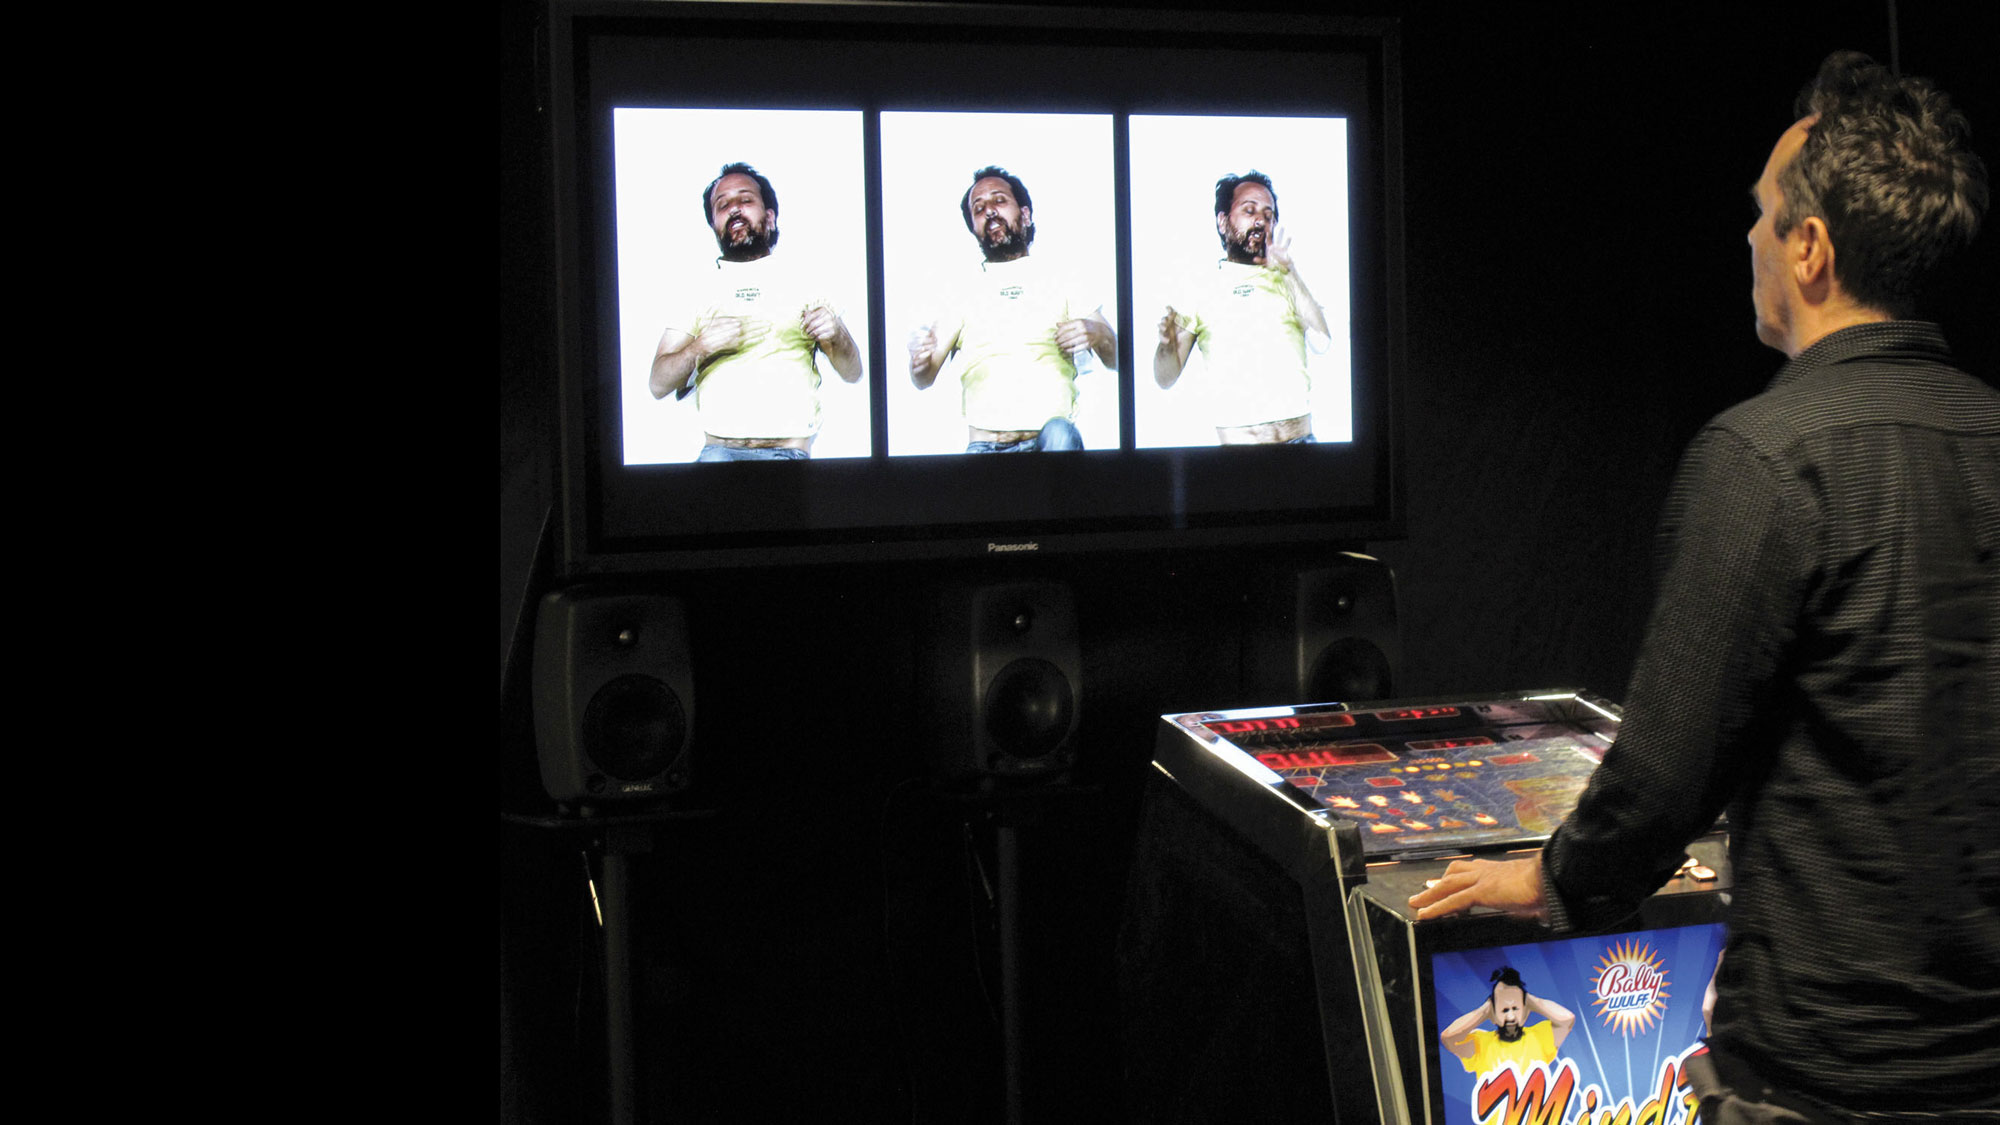 A man playing a pinball machine in front of three projected images of another man in various states of motion. 